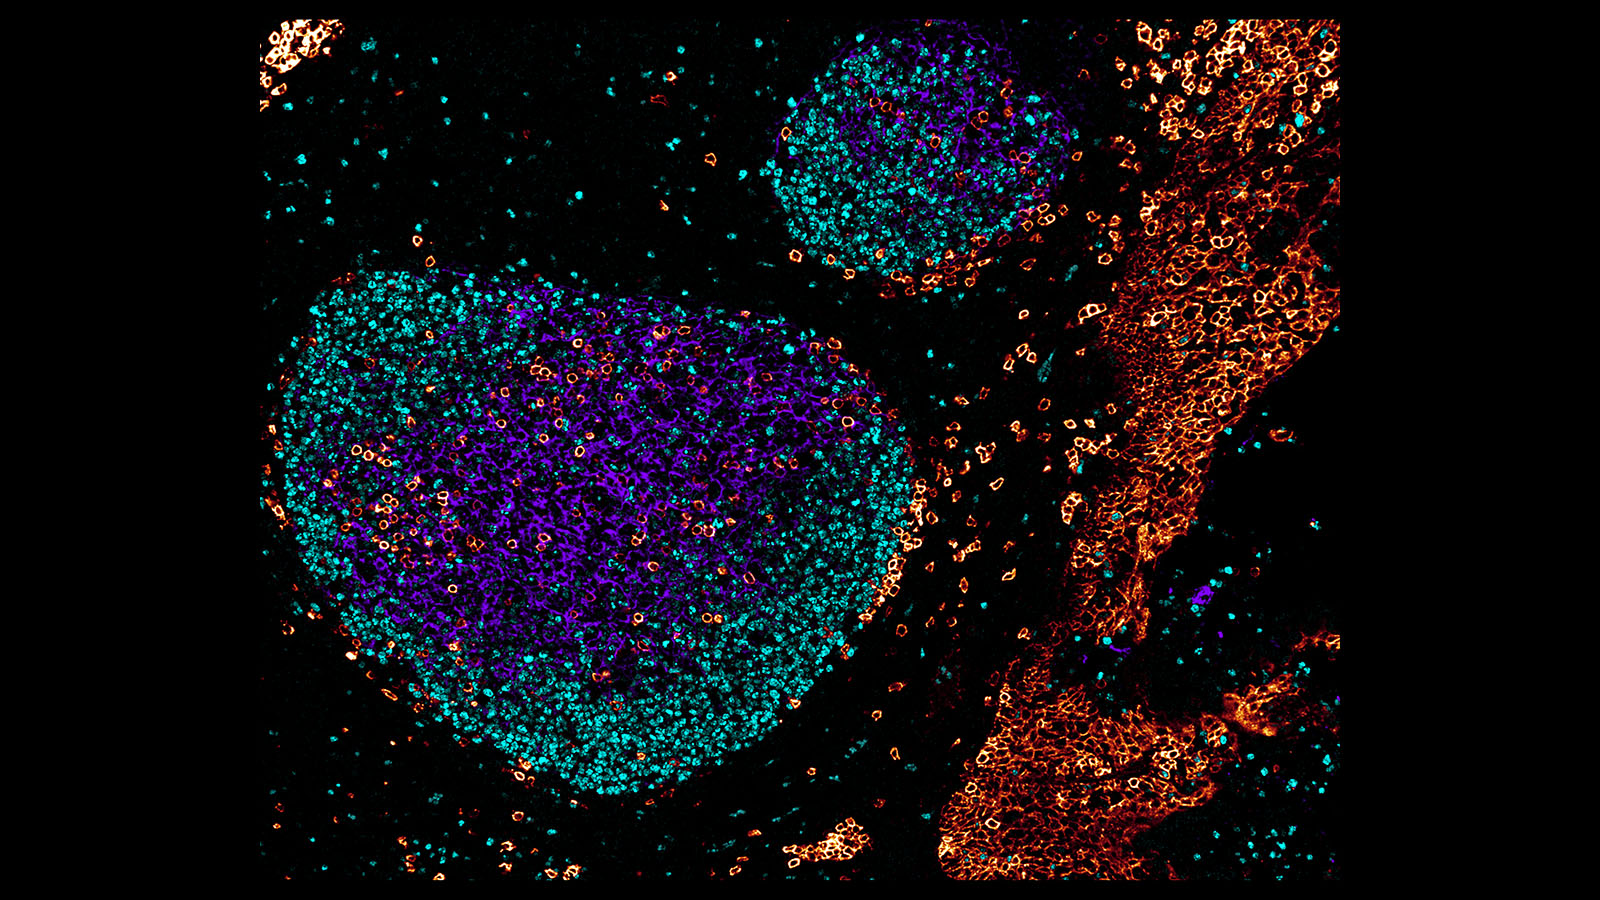 Confocal microscopy image of a human tonsil by Dr. Andrea Radtke in the Germain lab at NIAID